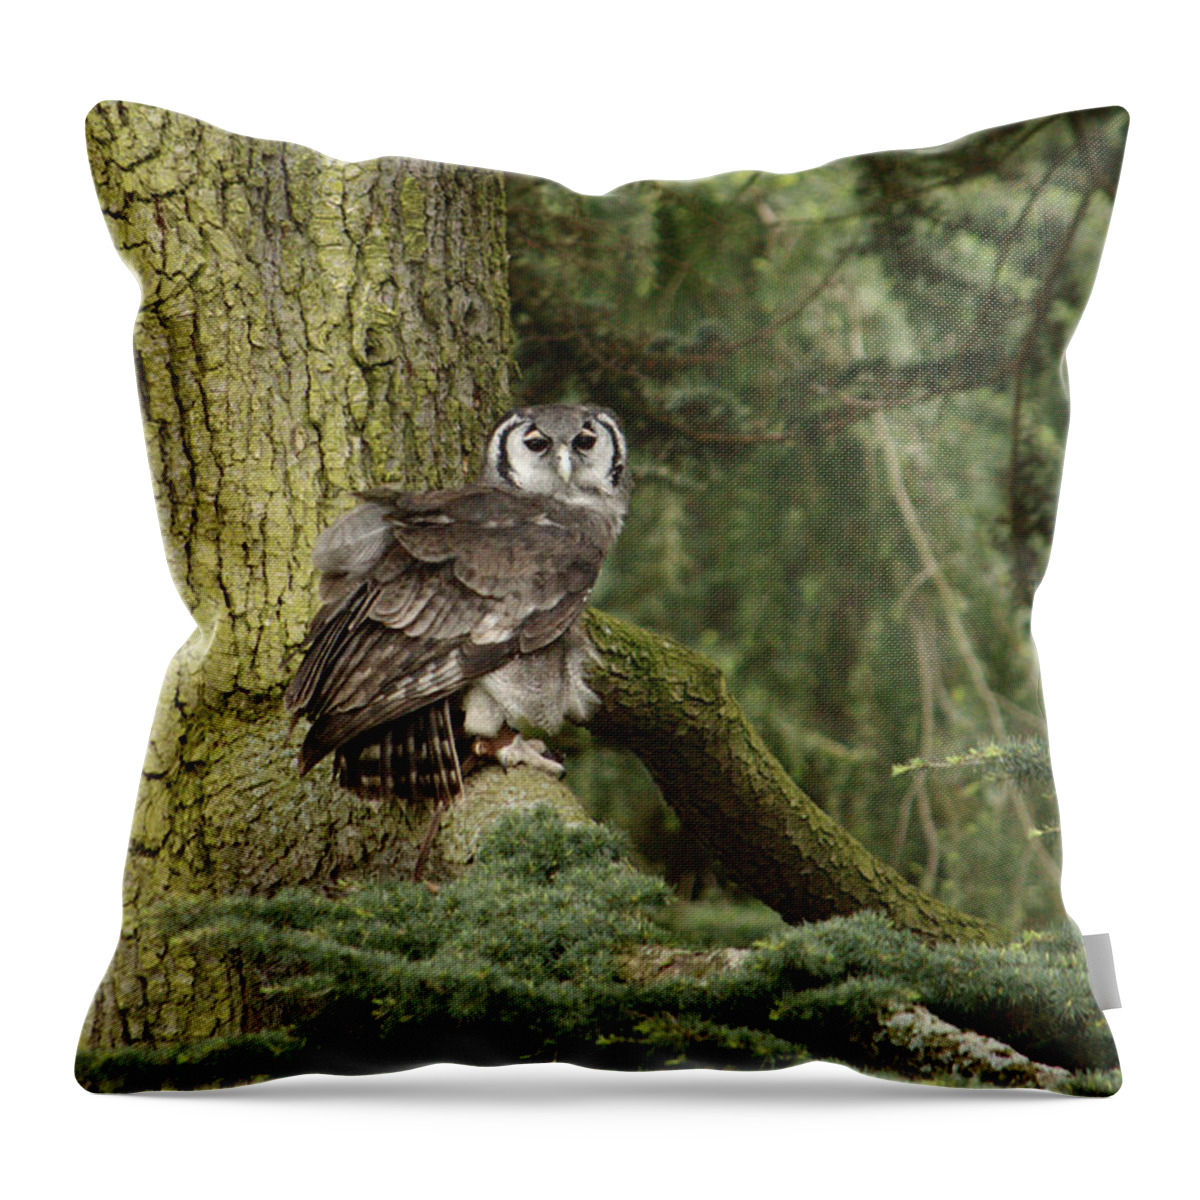 Owl Throw Pillow featuring the photograph Eagle Owl In Forest by Adrian Wale